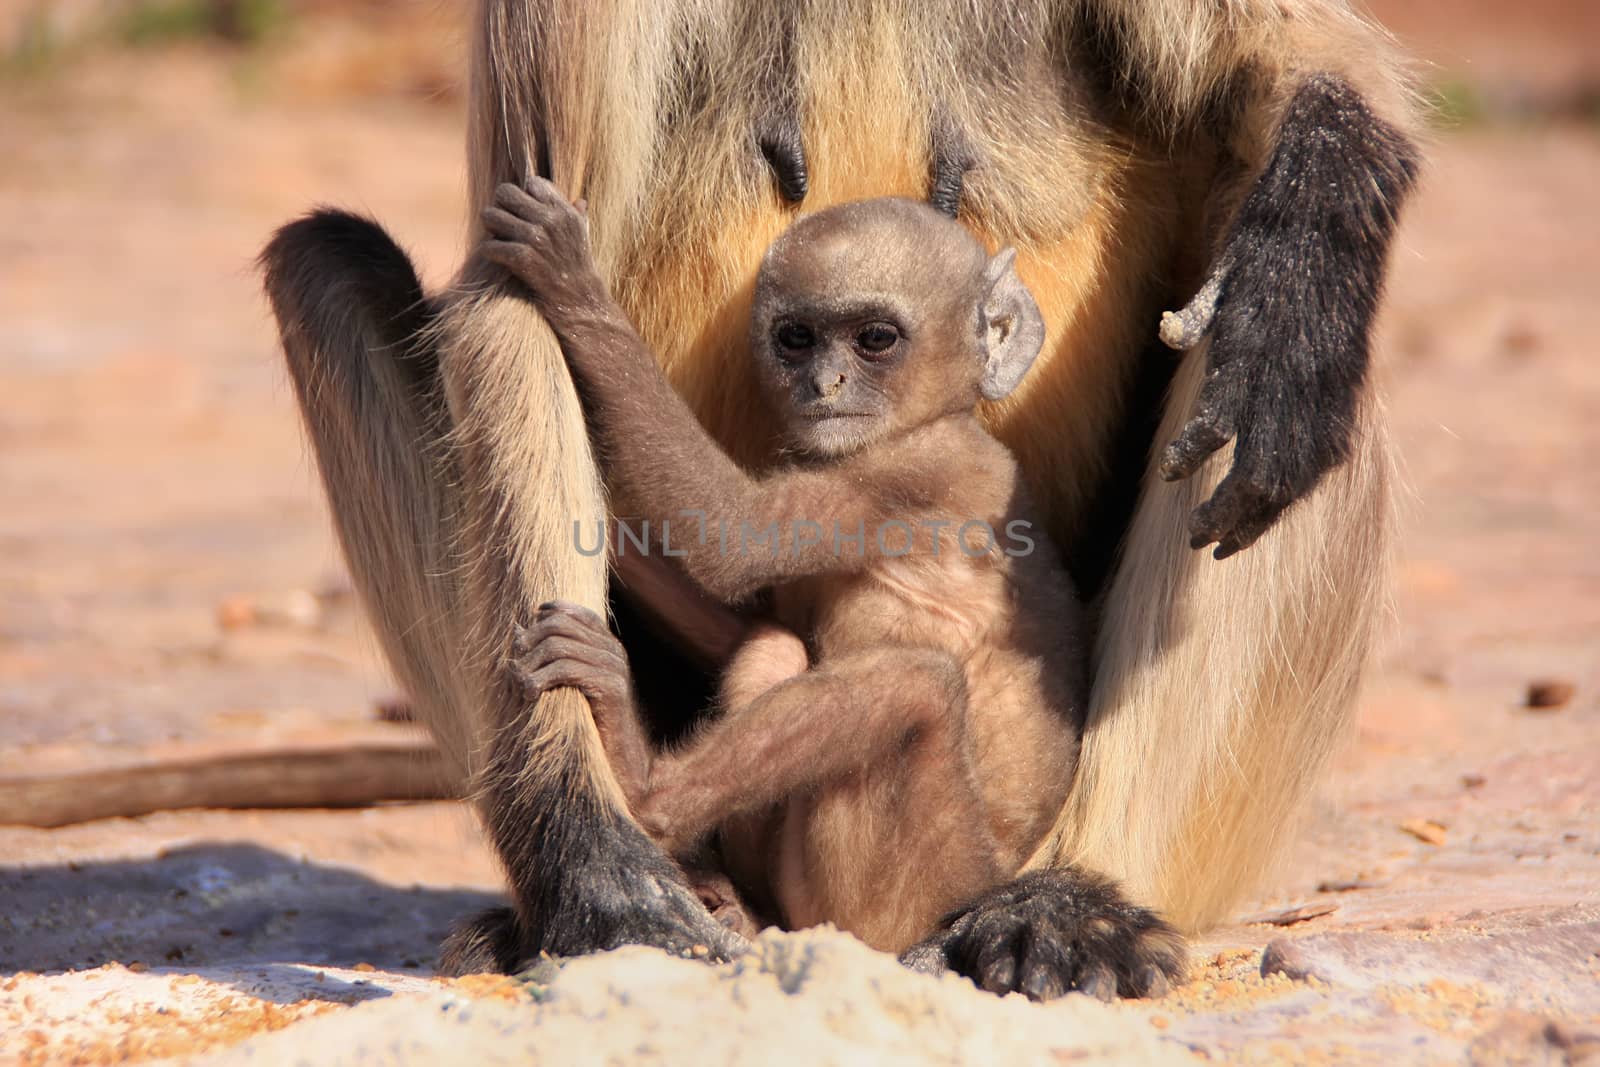 Baby Gray langur (Semnopithecus dussumieri) playing near mother, Ranthambore Fort, Rajasthan, India